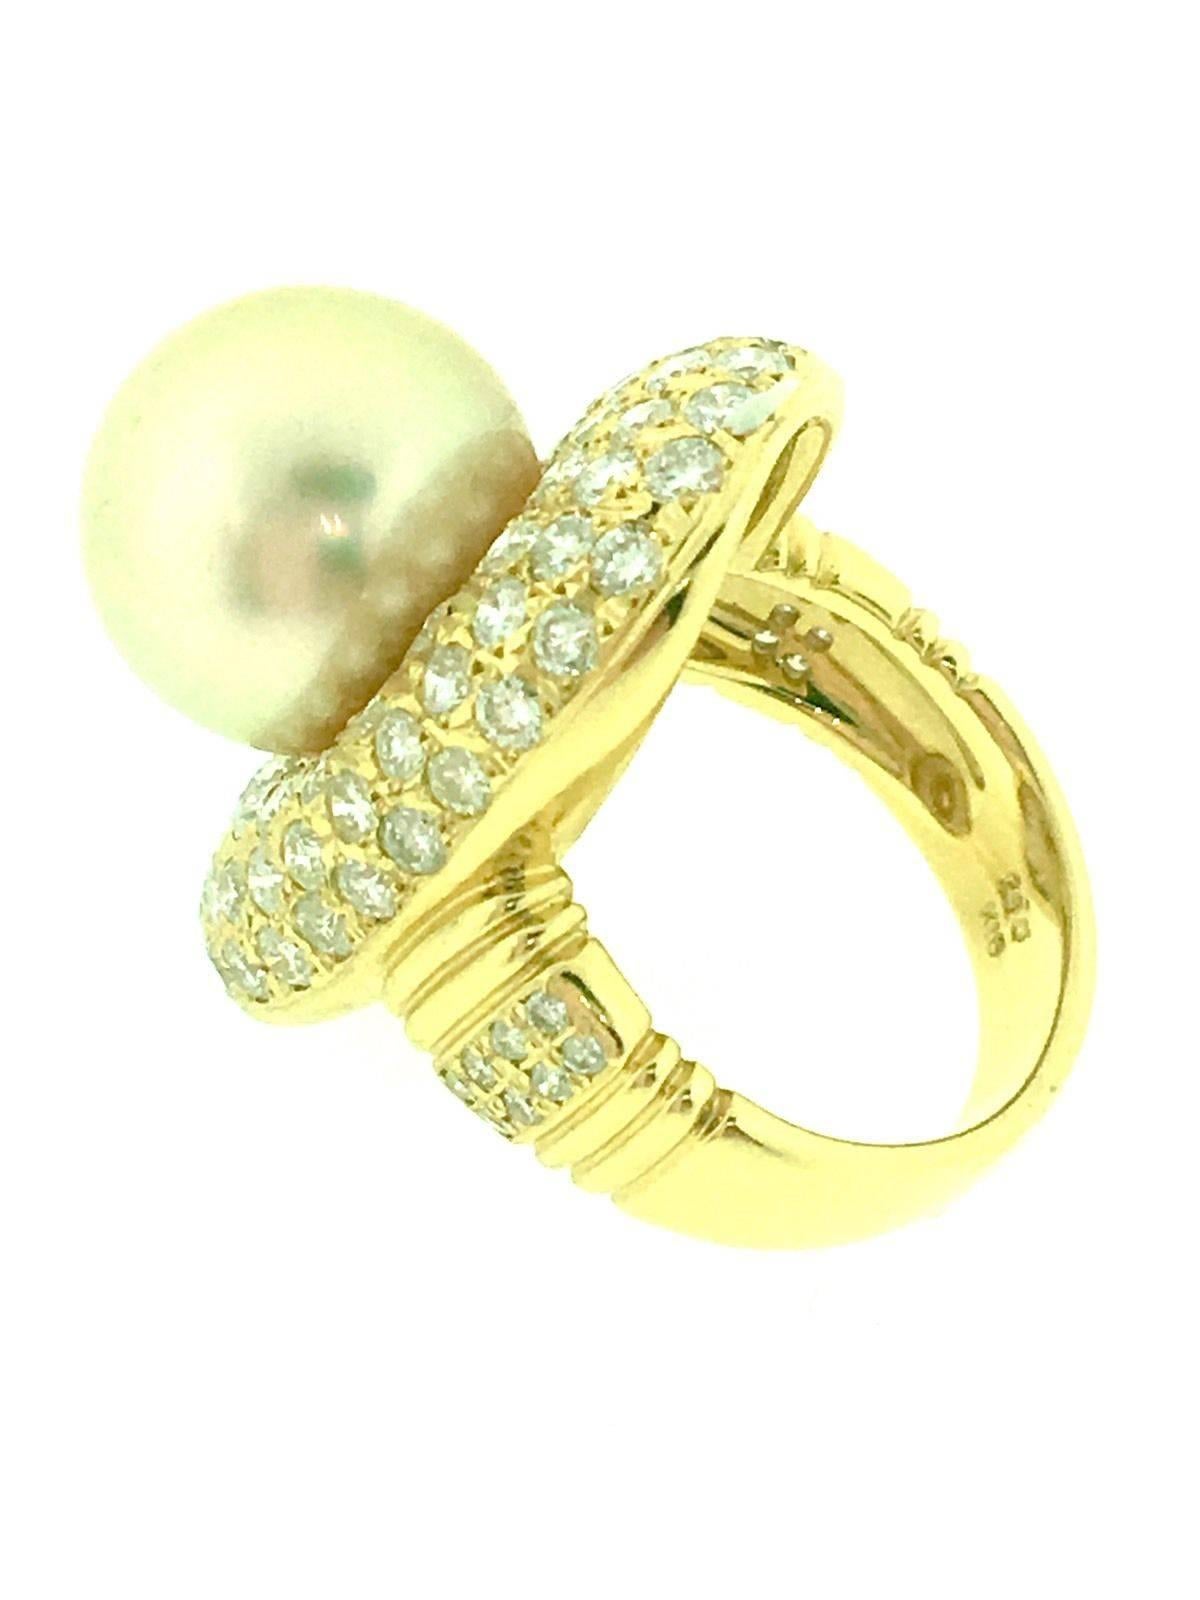 Elegant Pearl and Diamond Cocktail ring featuring 12.5mm Golden South Sea Pearl in the center framed by 2.60 carats of Round Brilliant White Diamonds
G color and VS clarity, set in 18k yellow gold. Ring shank beautifully decorated with 8 white